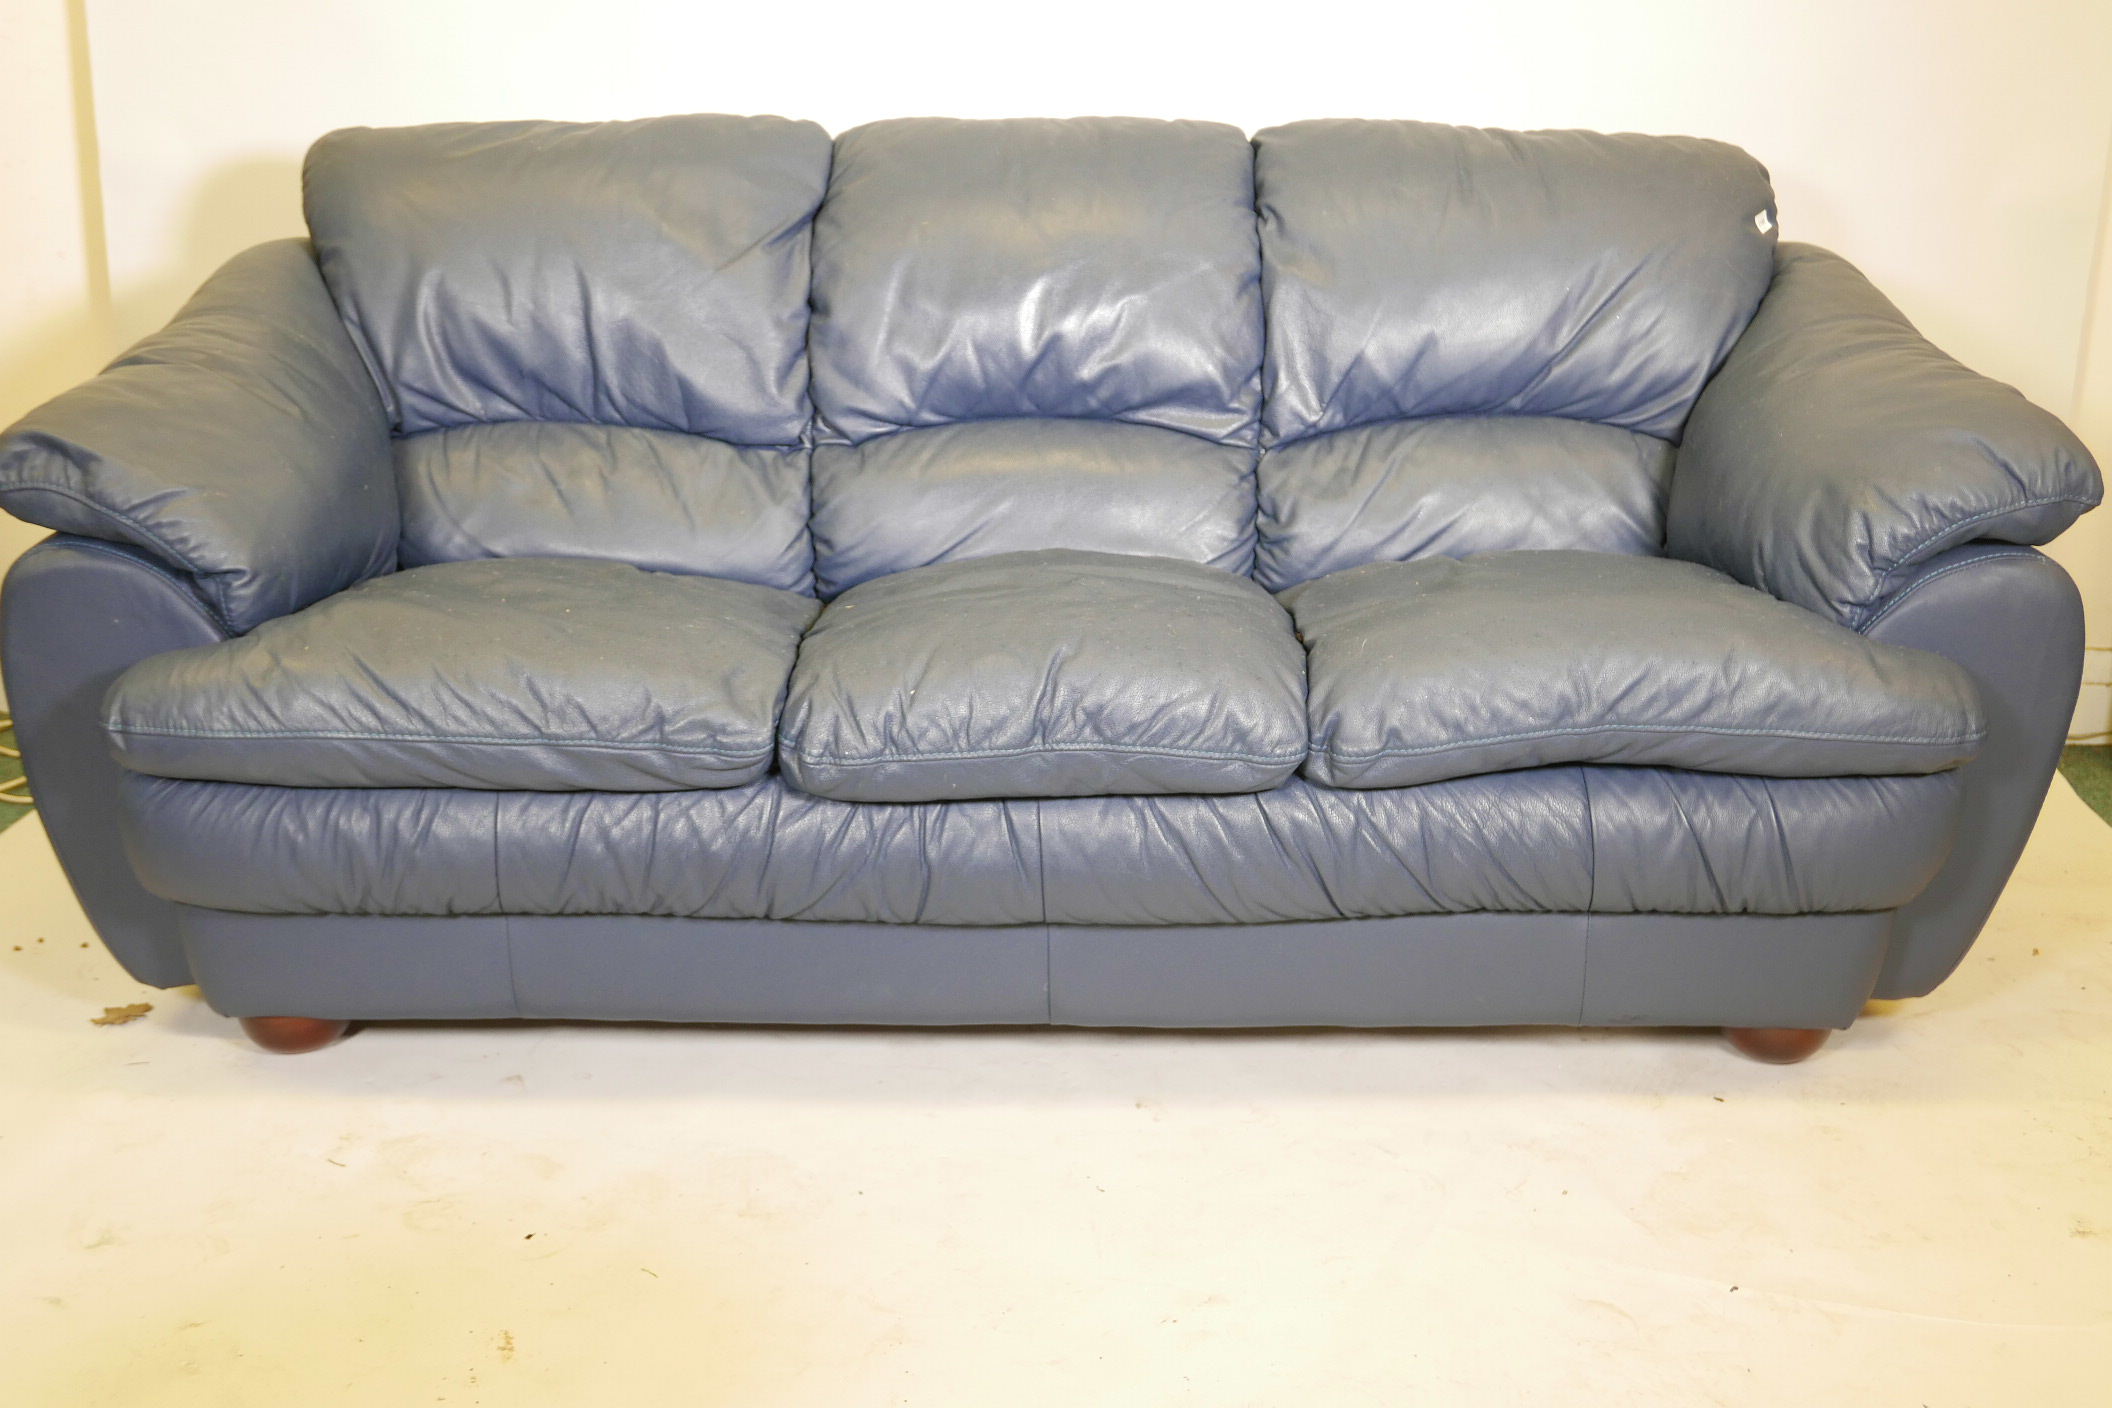 A blue leather three seater sofa, 84" wide